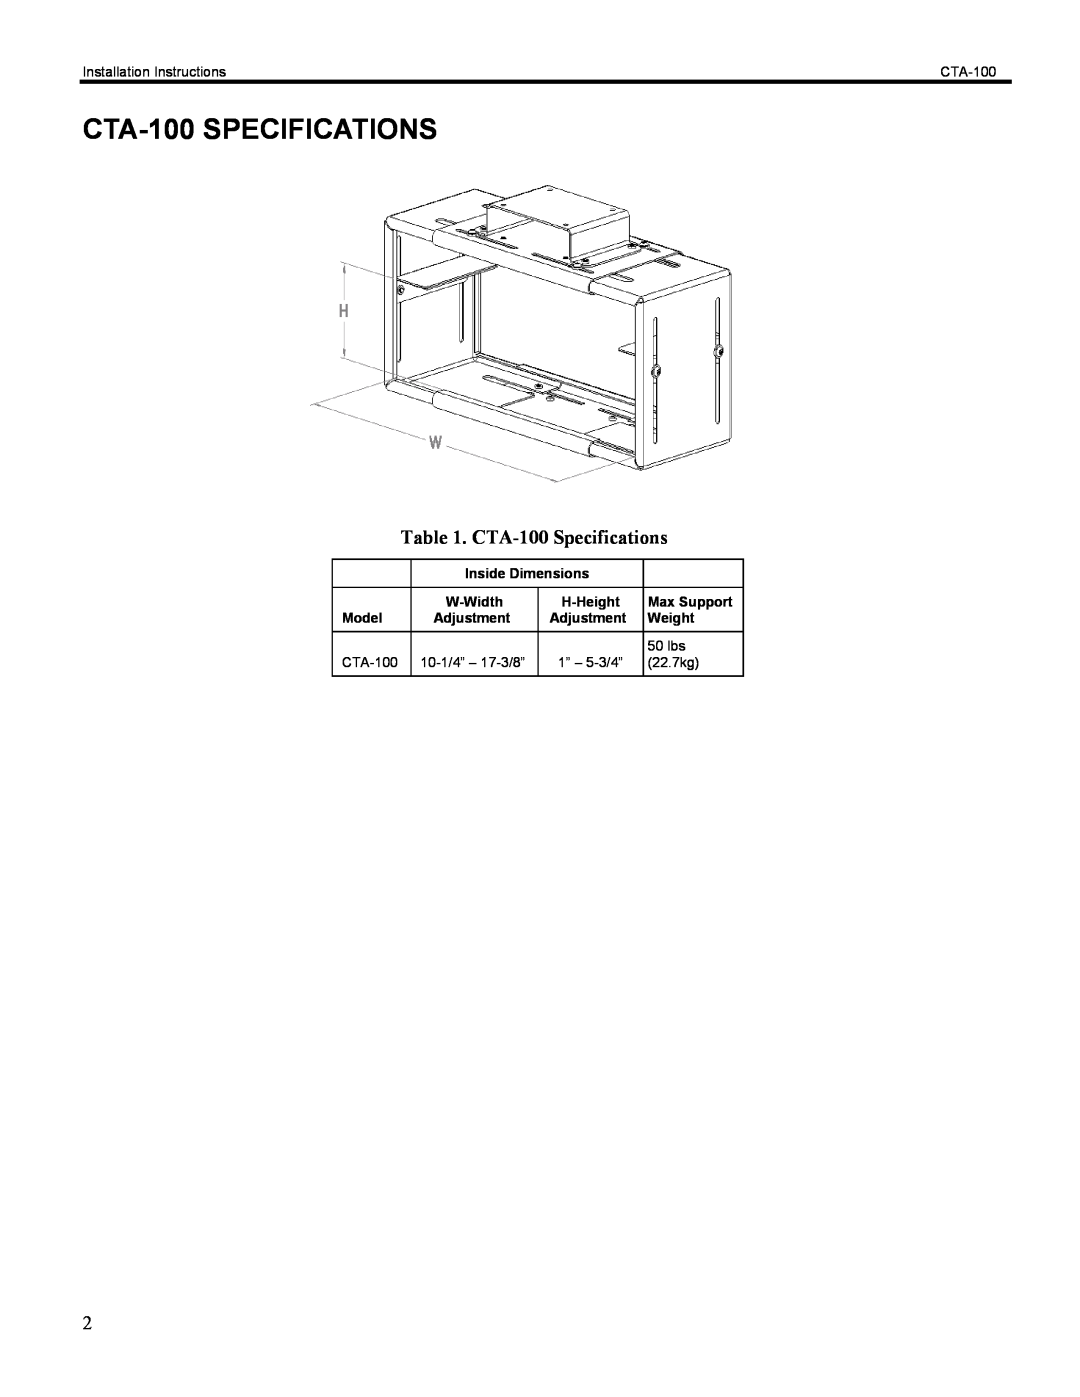 Chief Manufacturing CTA-100 SPECIFICATIONS, Installation Instructions, Inside Dimensions, Max Support, Model, Weight 